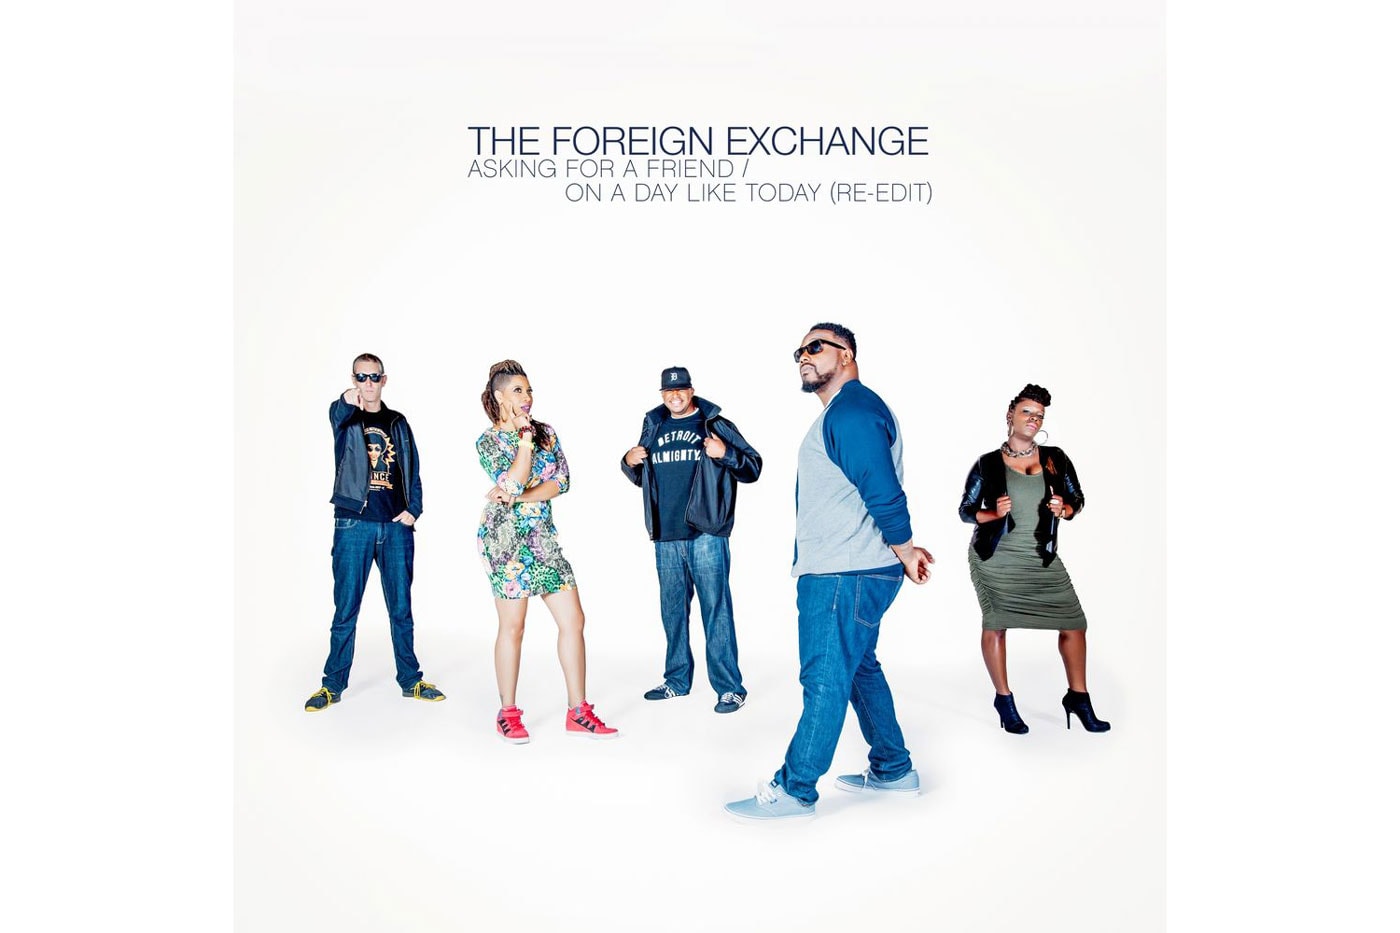 Watch "Asking For A Friend" from Foreign Exchange